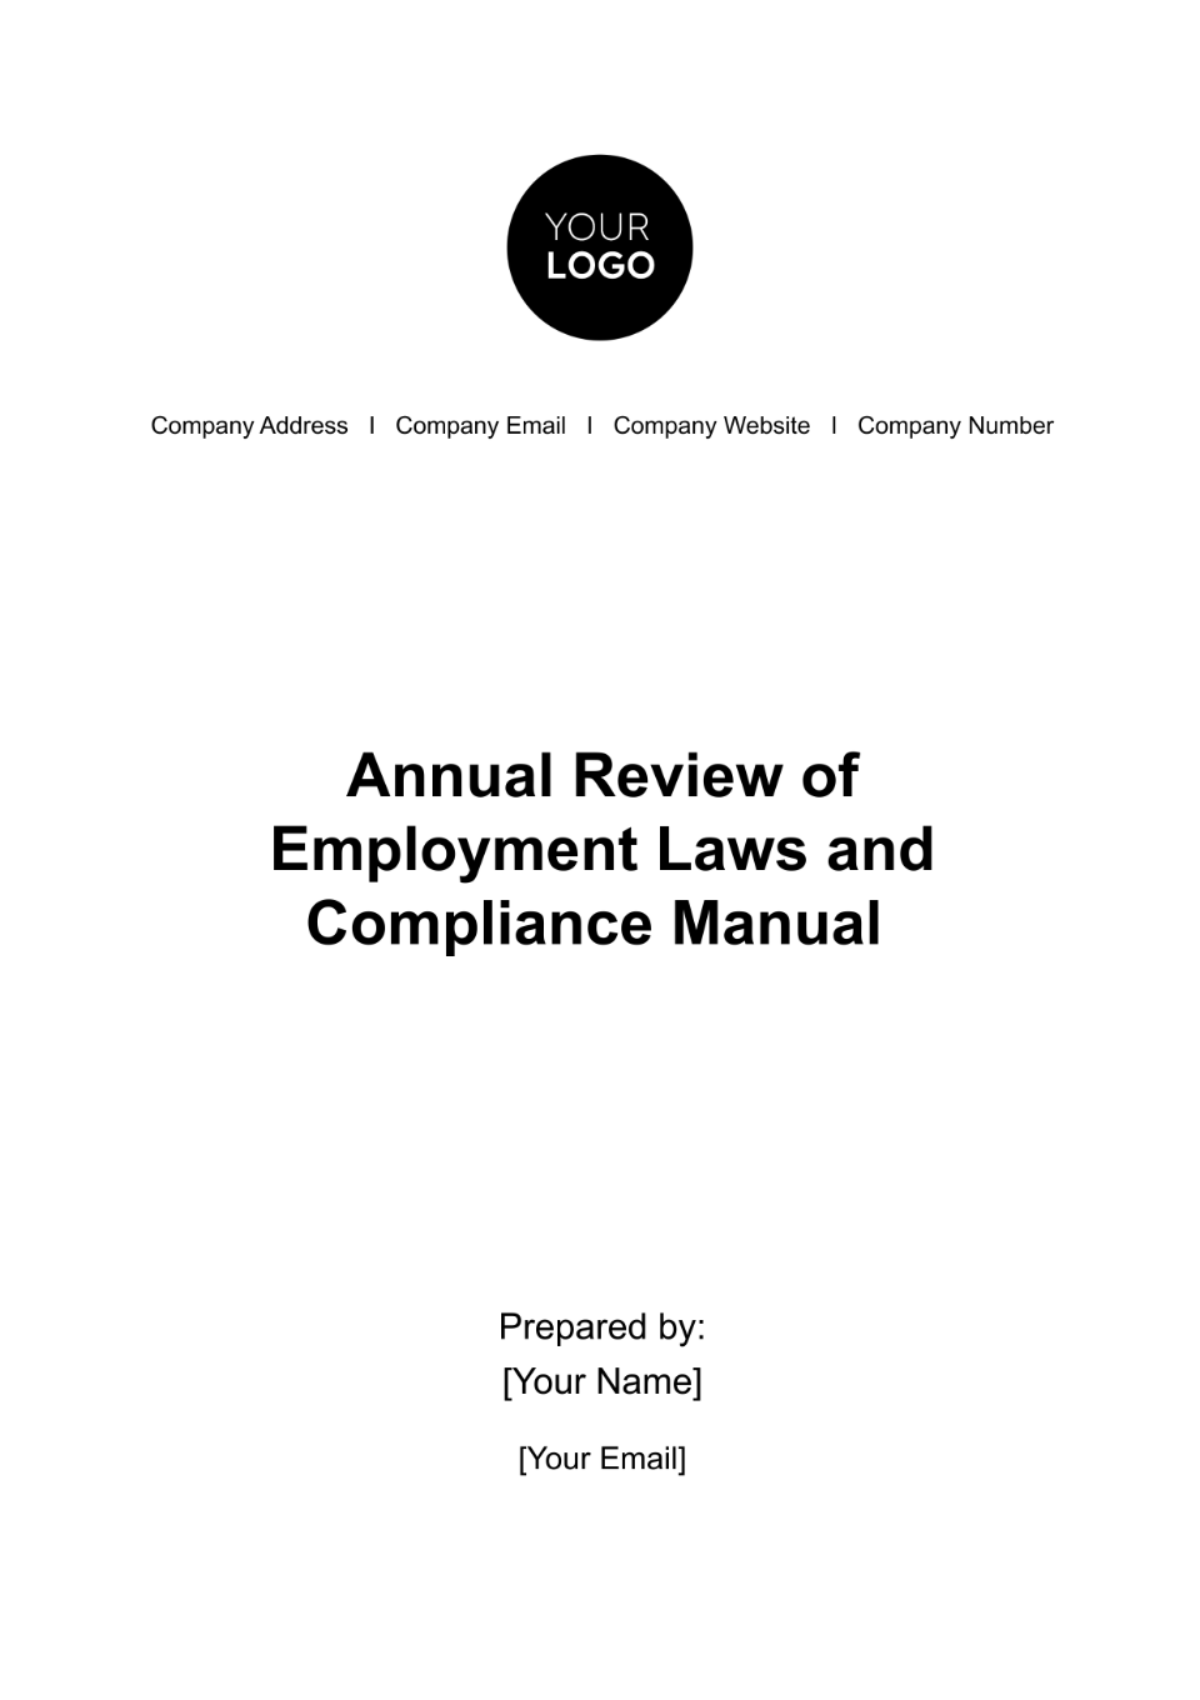 Annual Review of Employment Laws and Compliance Manual HR Template